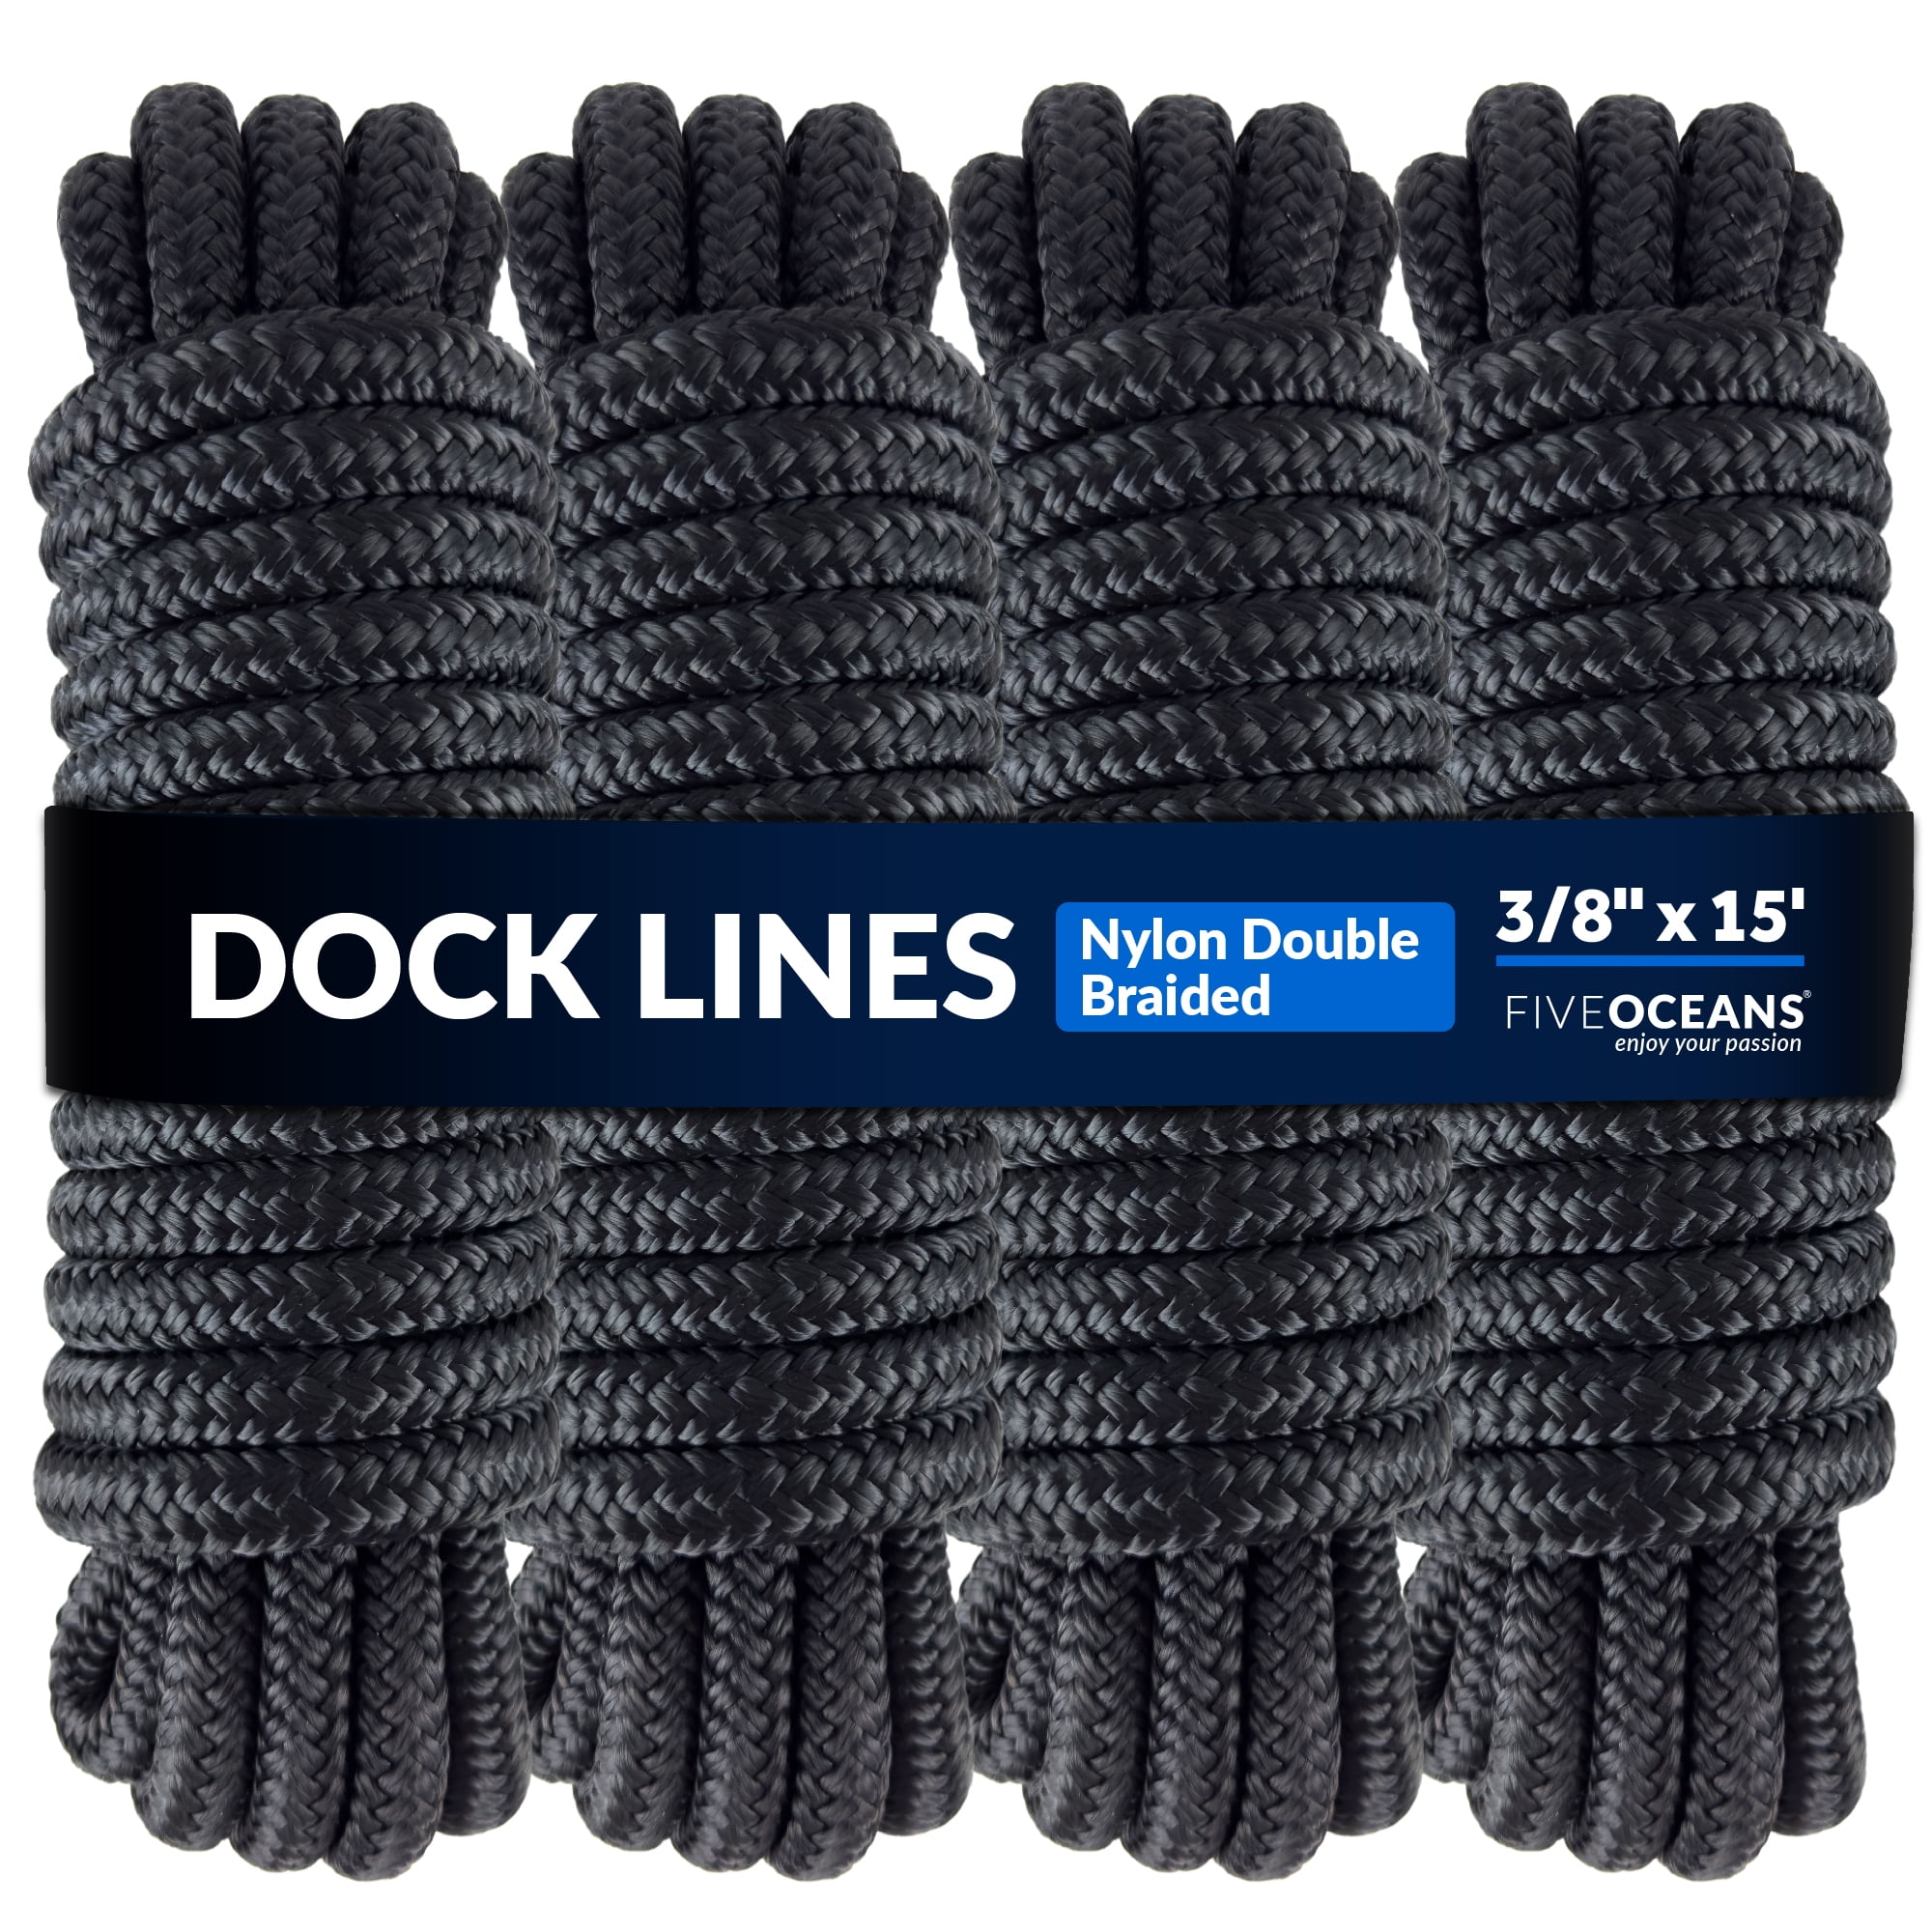 Five Oceans 4-Pack 3/8 x 15' Boat Dock Lines with 12 Eyelet, Marine-Grade  Black Premium Double Braided Nylon Boat Rope 3/8 inch, Boat Ropes for  Docking with Loop or Fender Lines 